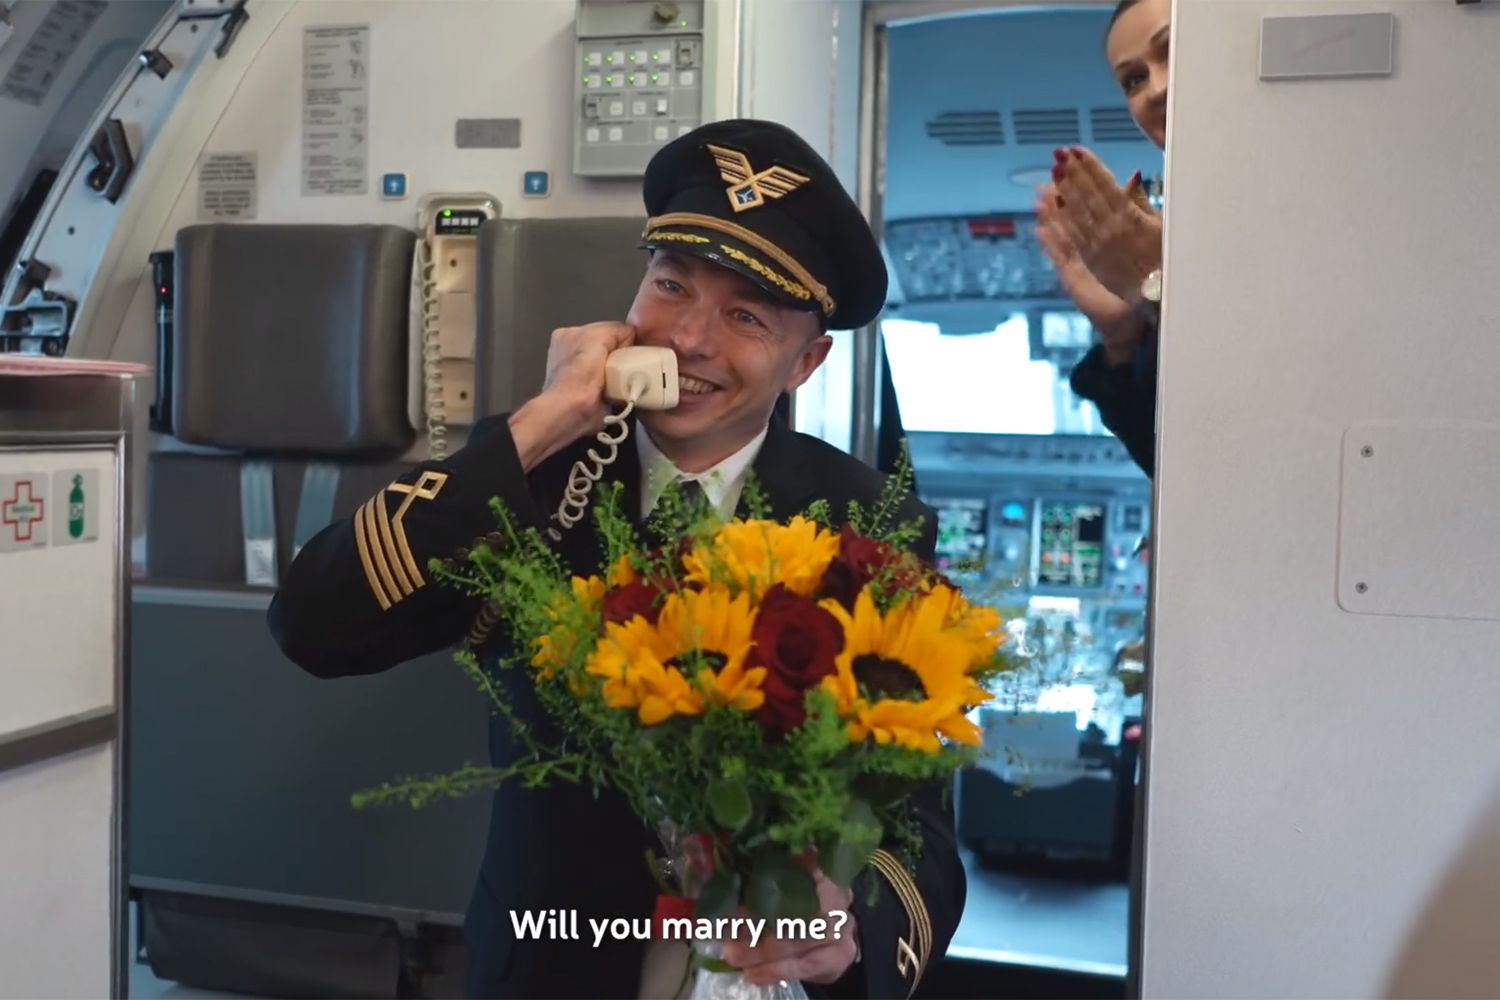 Captain Konrad proposed to Stewardess Paula during a flight to KrakÃ³w, the city where they first met